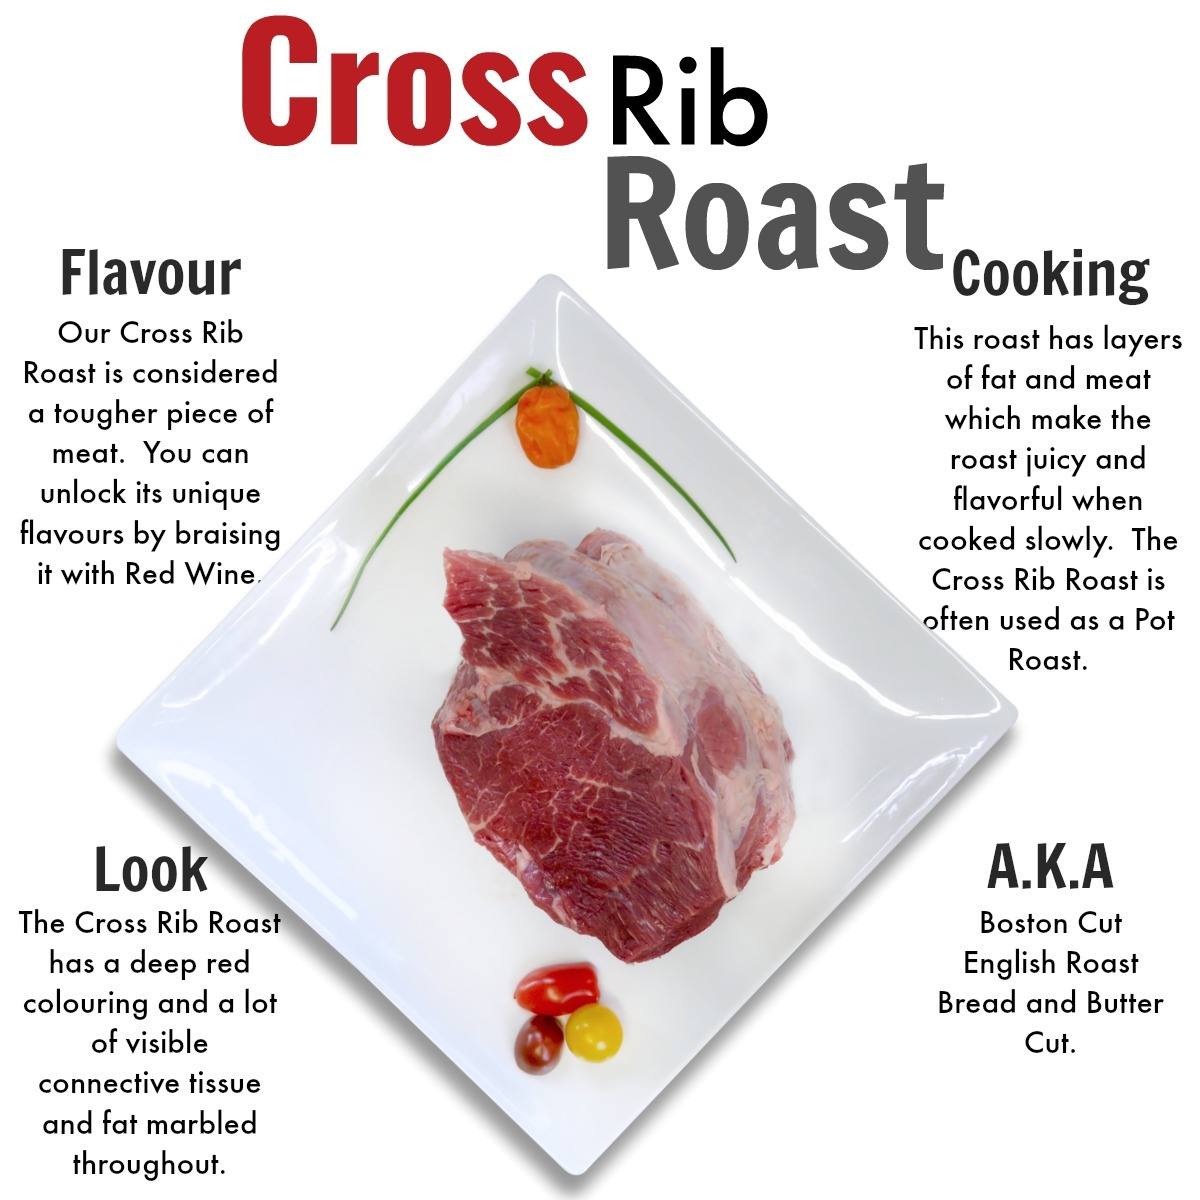 Affordable grass-fed beef delivery near me, steaks, ground beef and more - Nutrafams - Cross Rib Roast 2